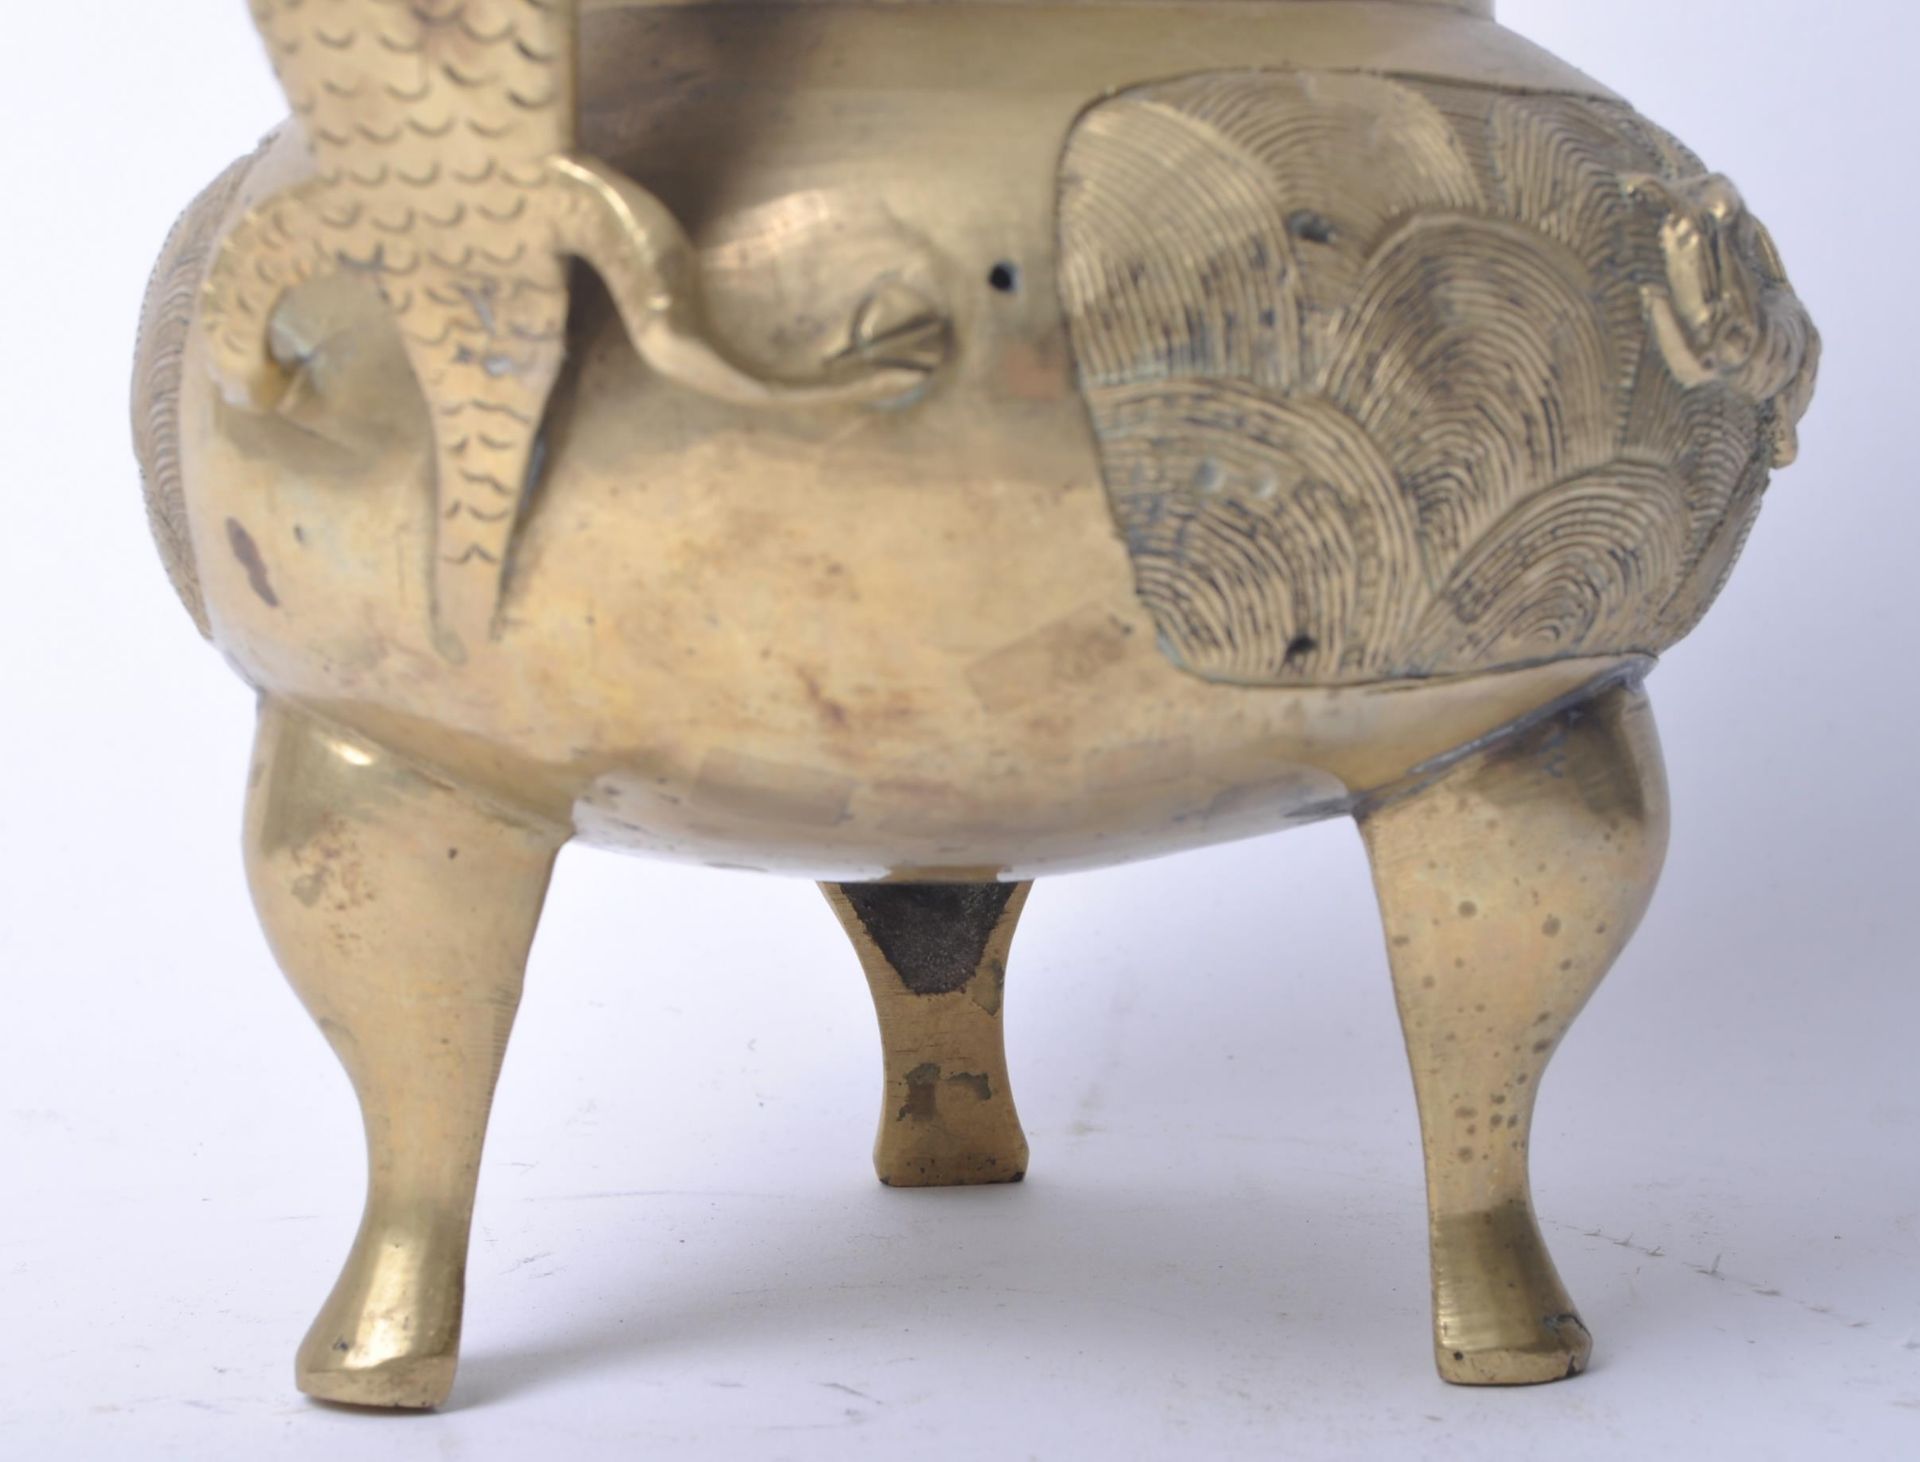 20TH CENTURY CHINESE BRASS INCENSE BURNER - Image 5 of 10